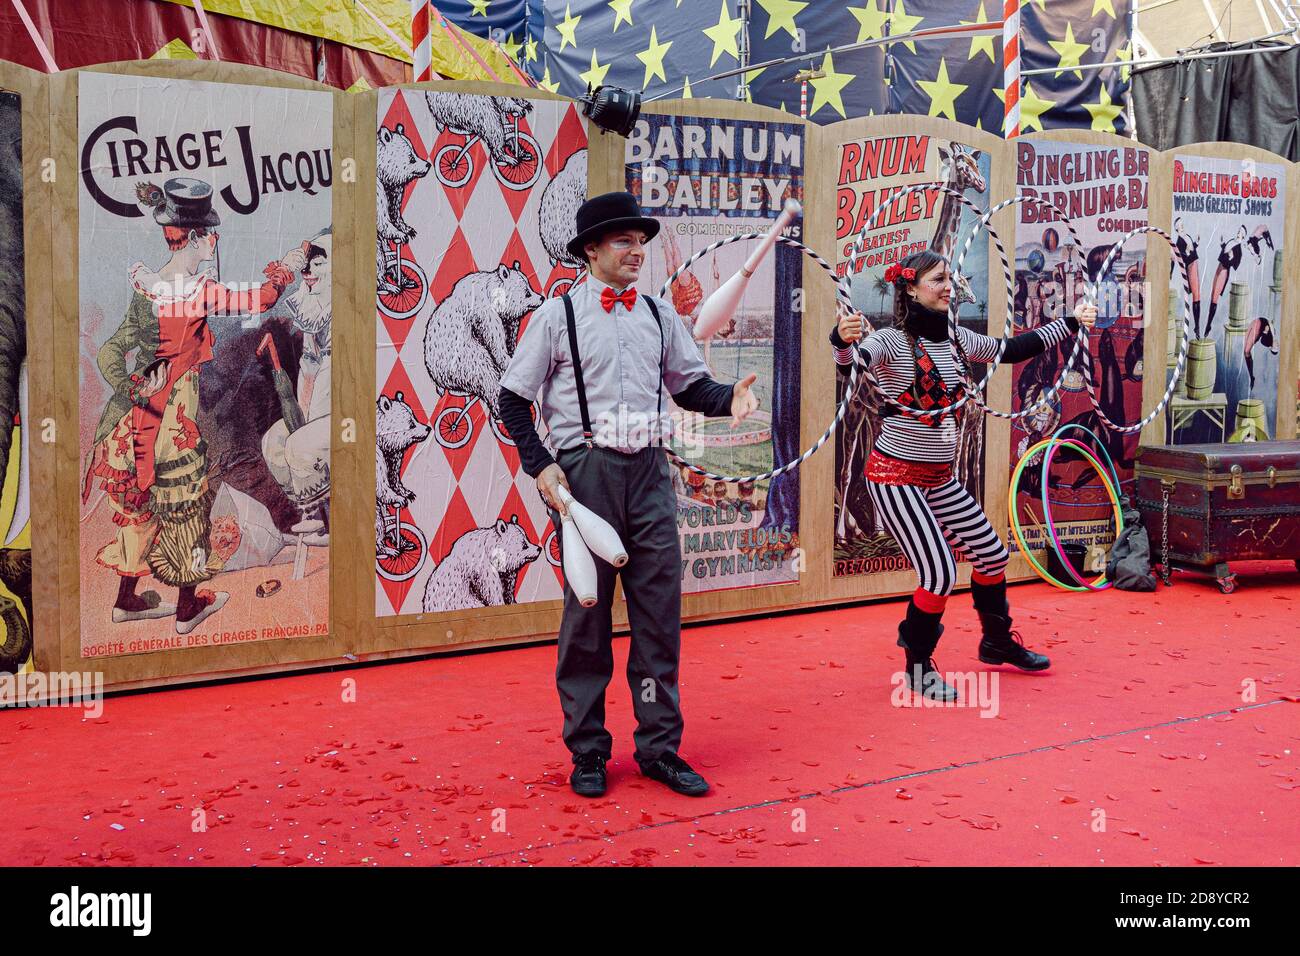 Circus performers in Venice during the Carnival playing with hula hoops and skittles on a red carpet Stock Photo